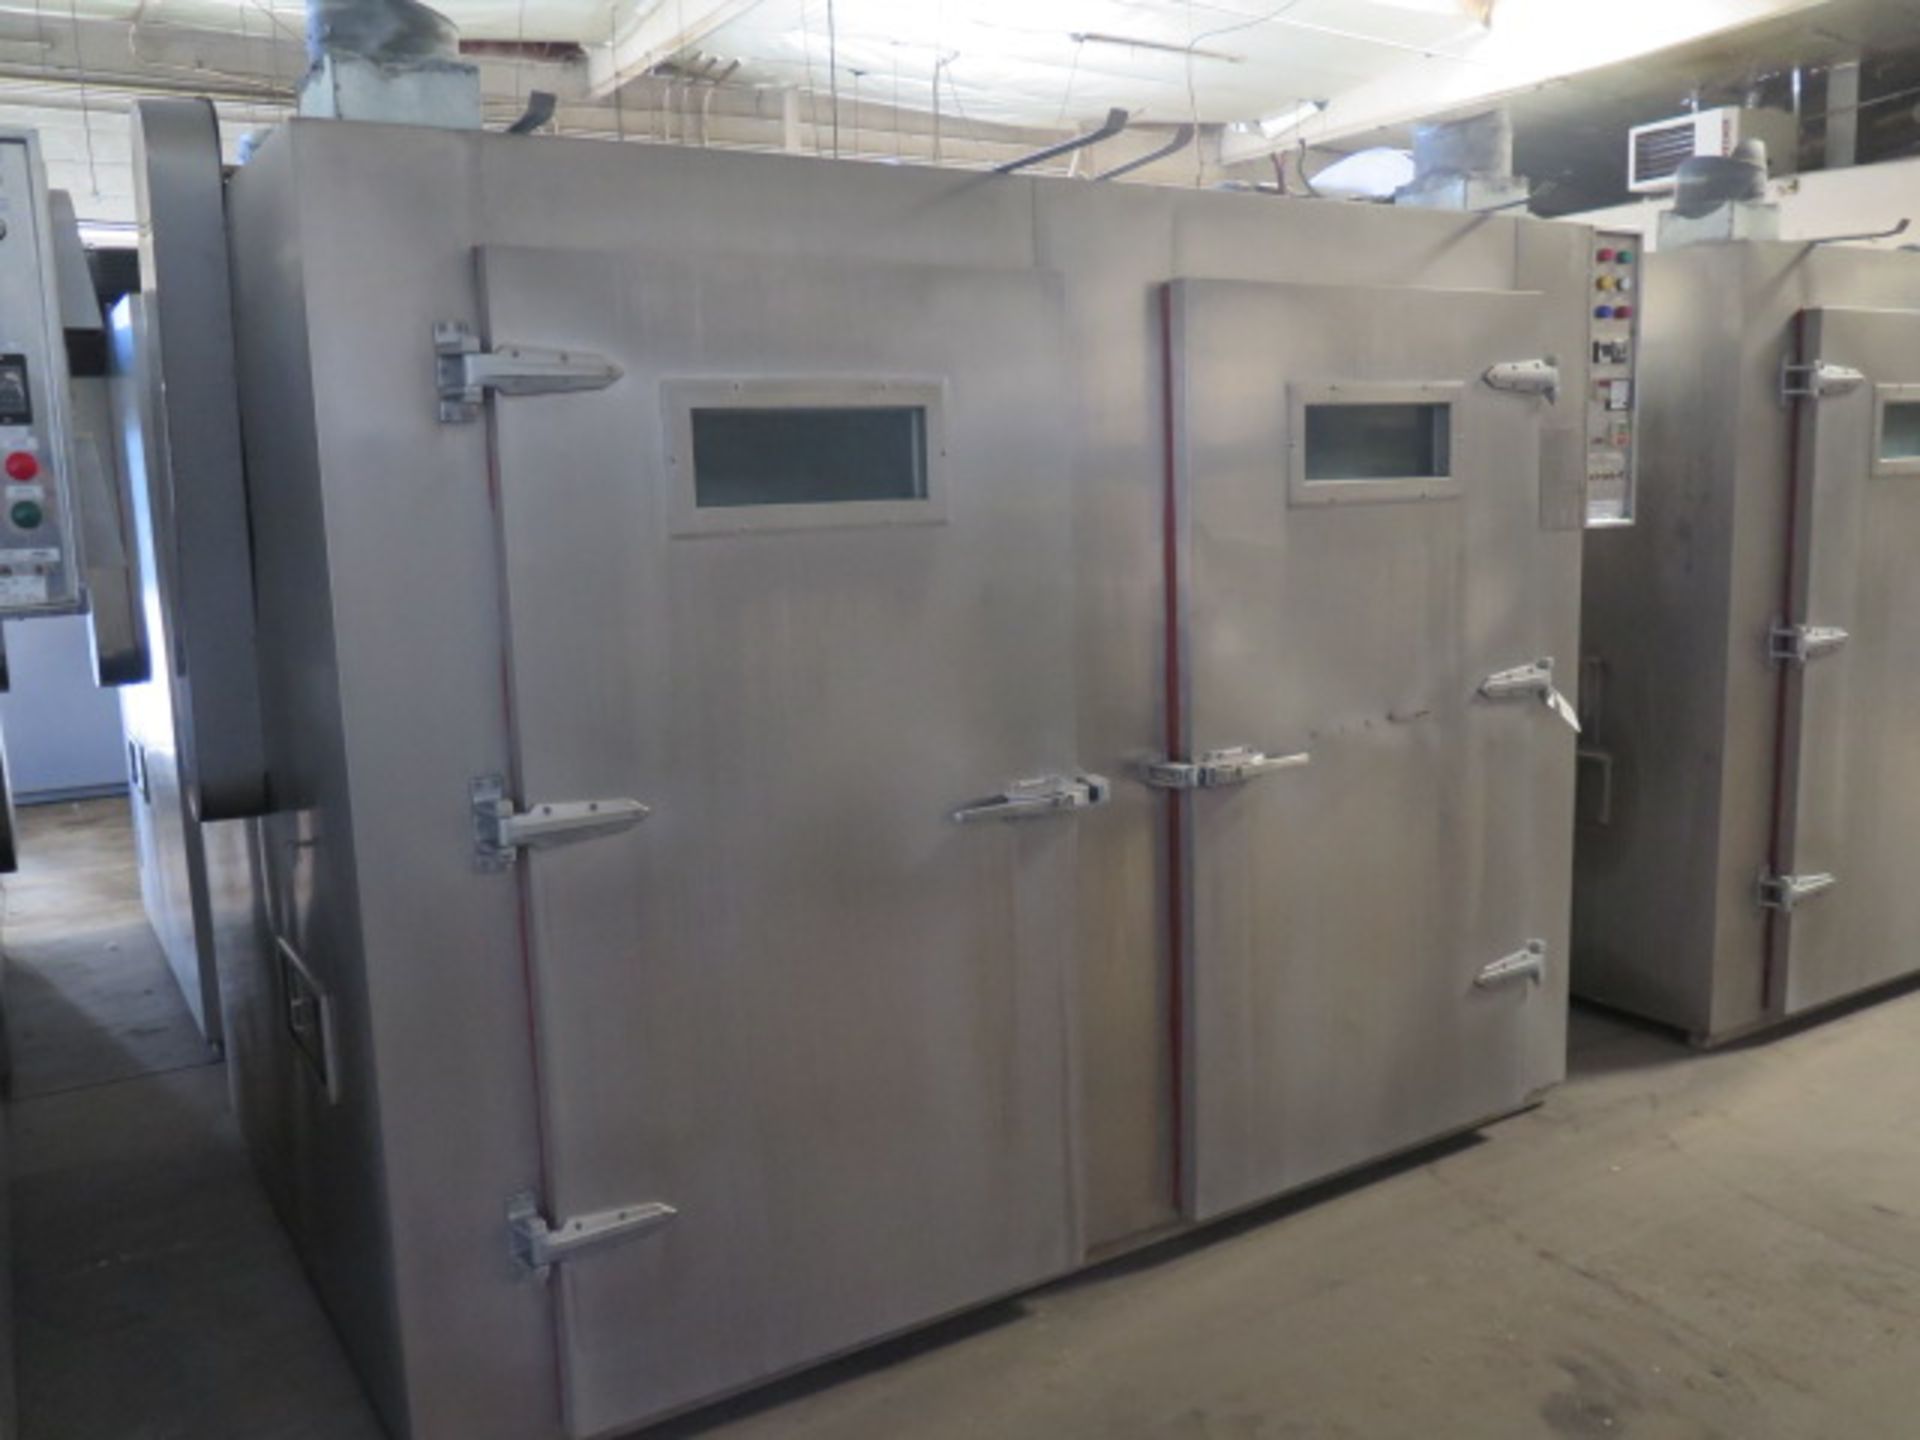 2014 Coolking Industrial mdl. Q-140 Type SY-80 2-Door Stainless Steel Industrial Oven w/ Digital - Image 3 of 11